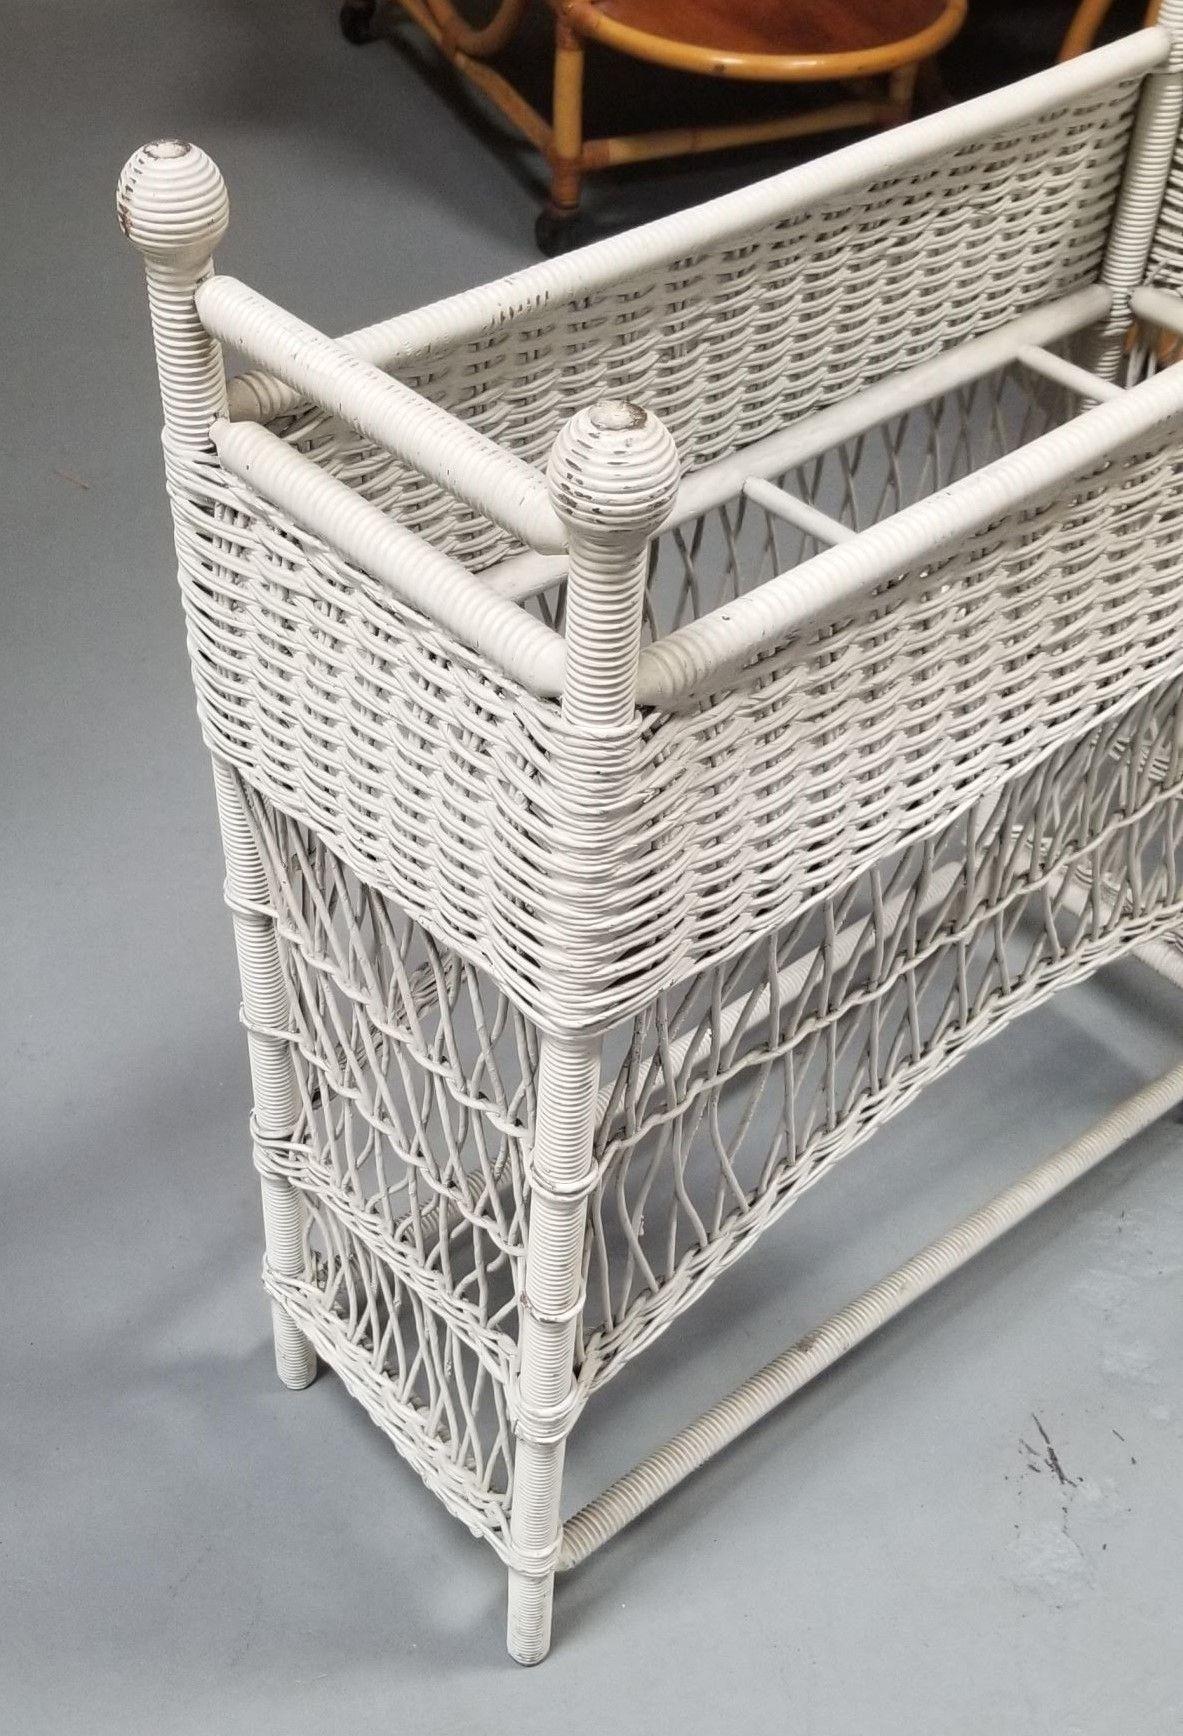 Elevate your botanical beauties with our Restored White Rattan Wicker Plant Stand, a shabby chic boho treasure. Lovingly restored, this piece exudes charm and character. Its intricate rattan design and distressed white finish make it the perfect